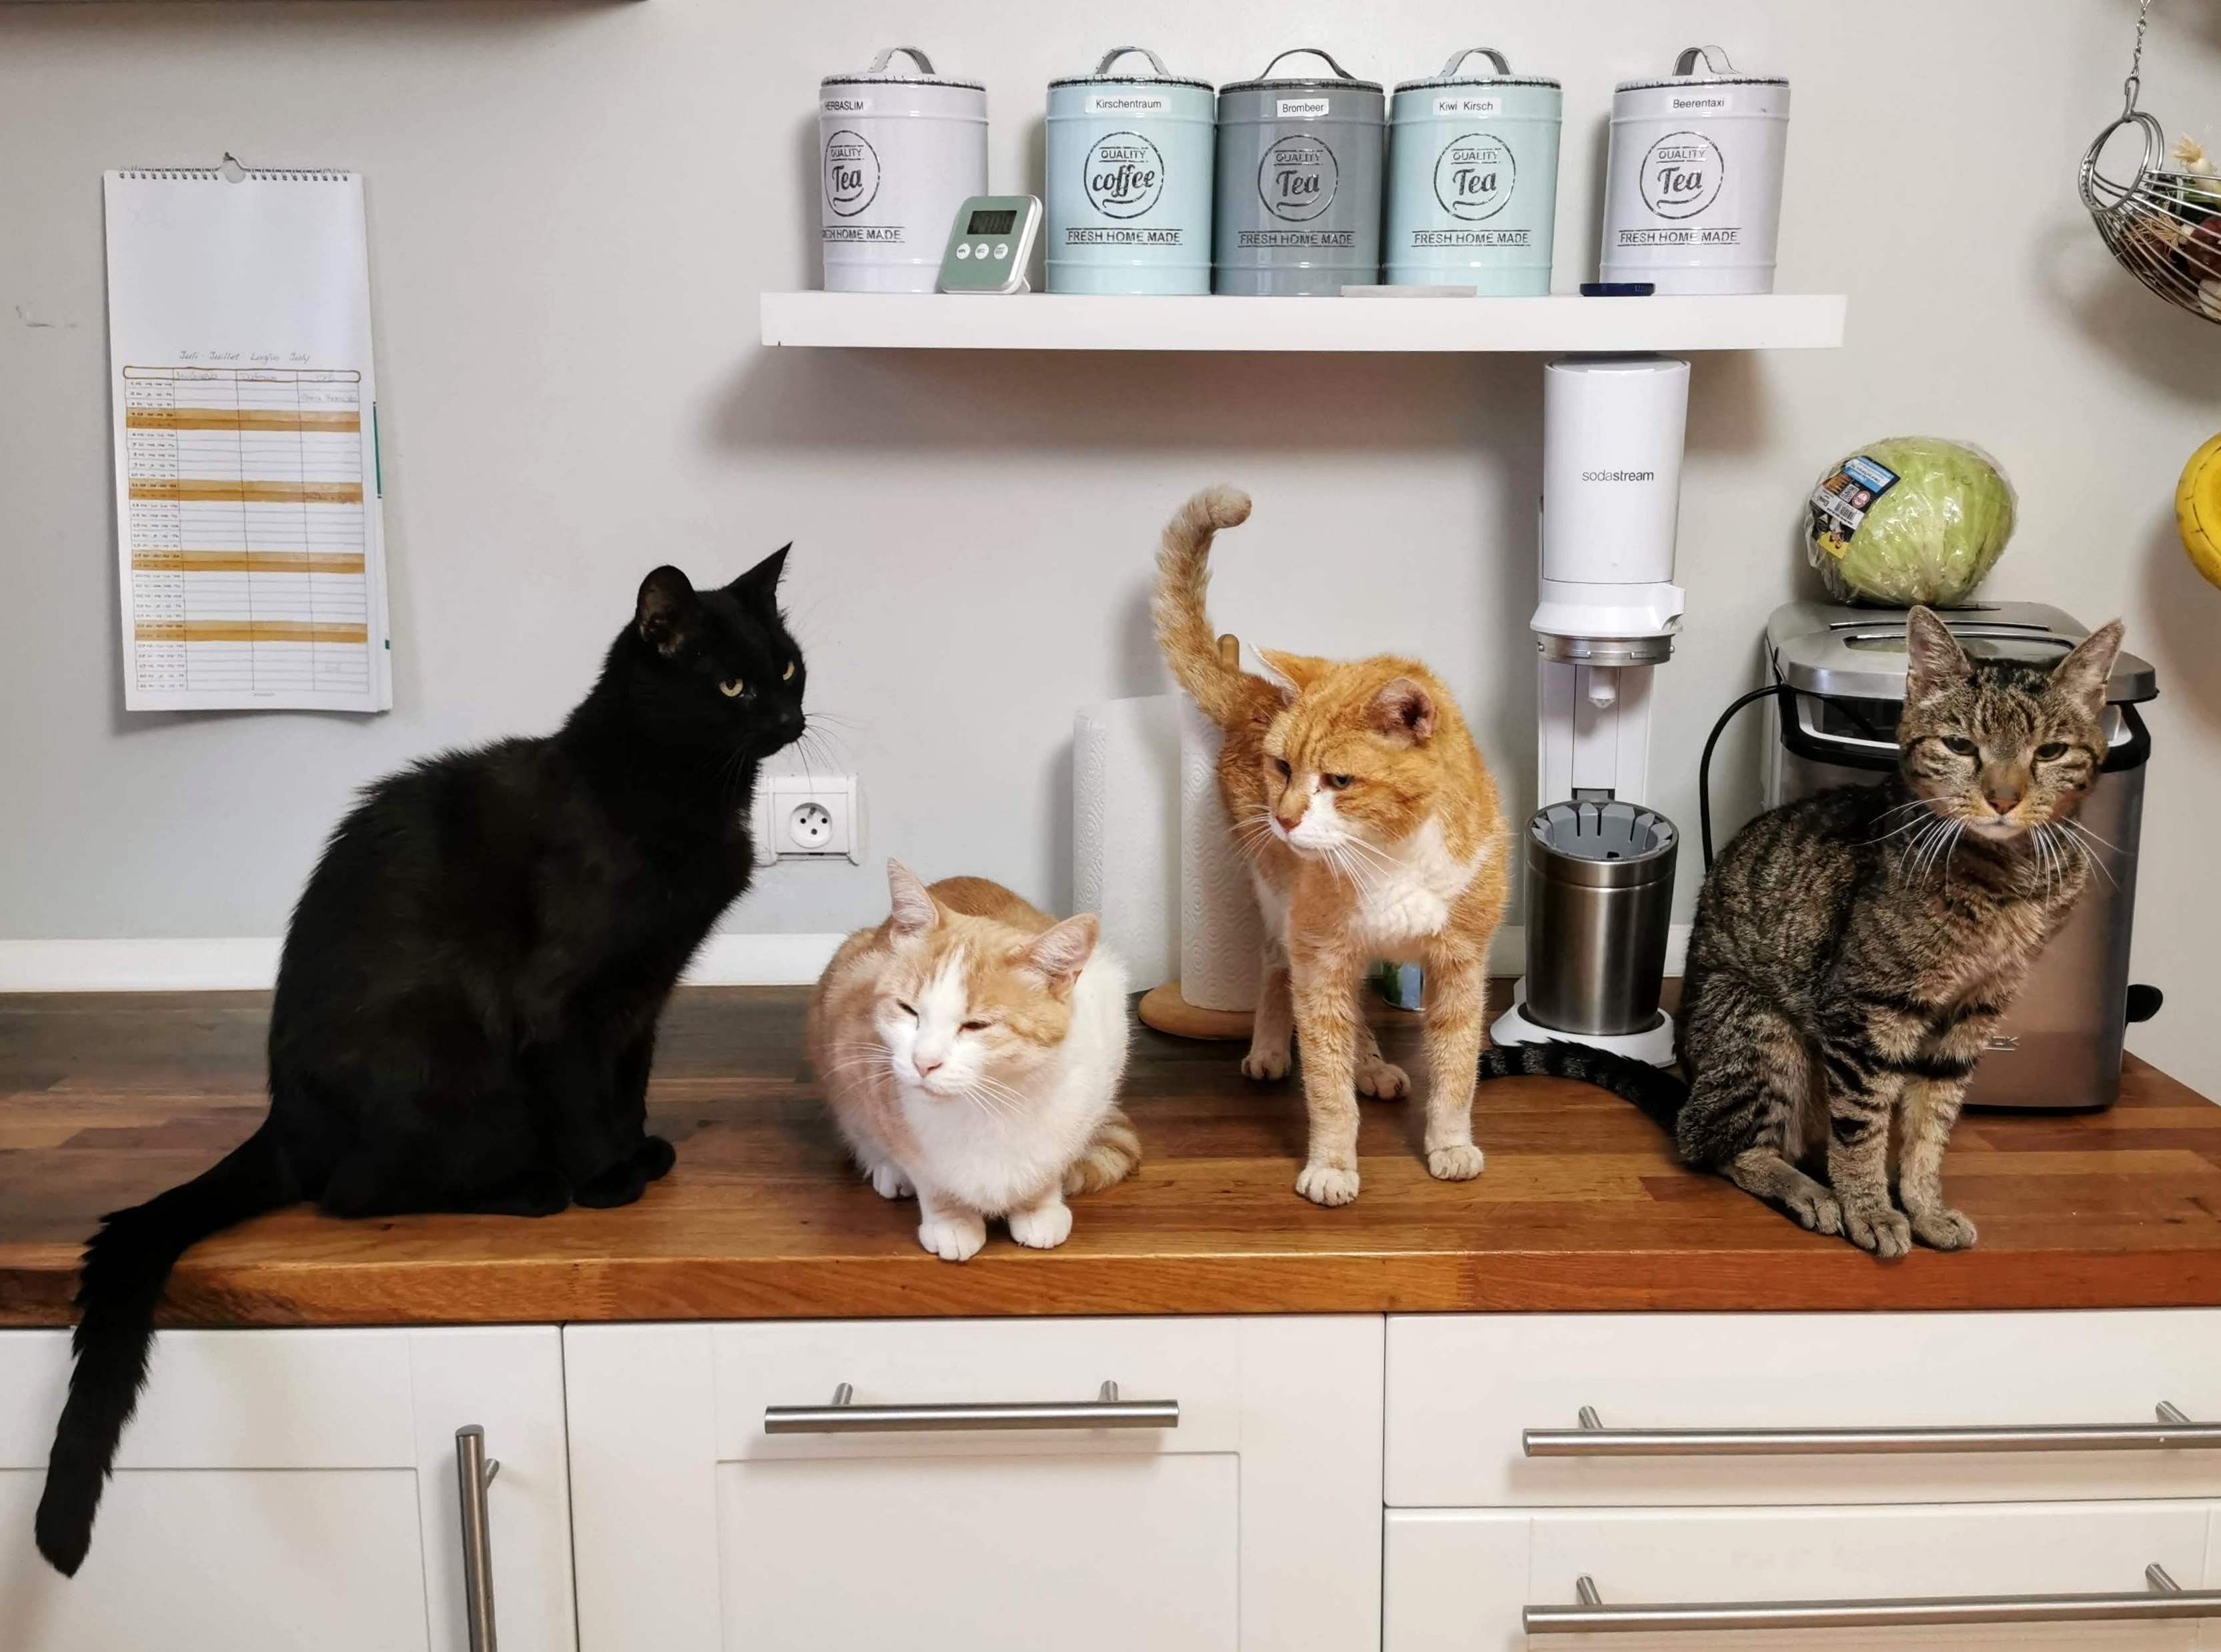 Four different house cats sitting on a kitchen counter below a shelf of tea canisters.